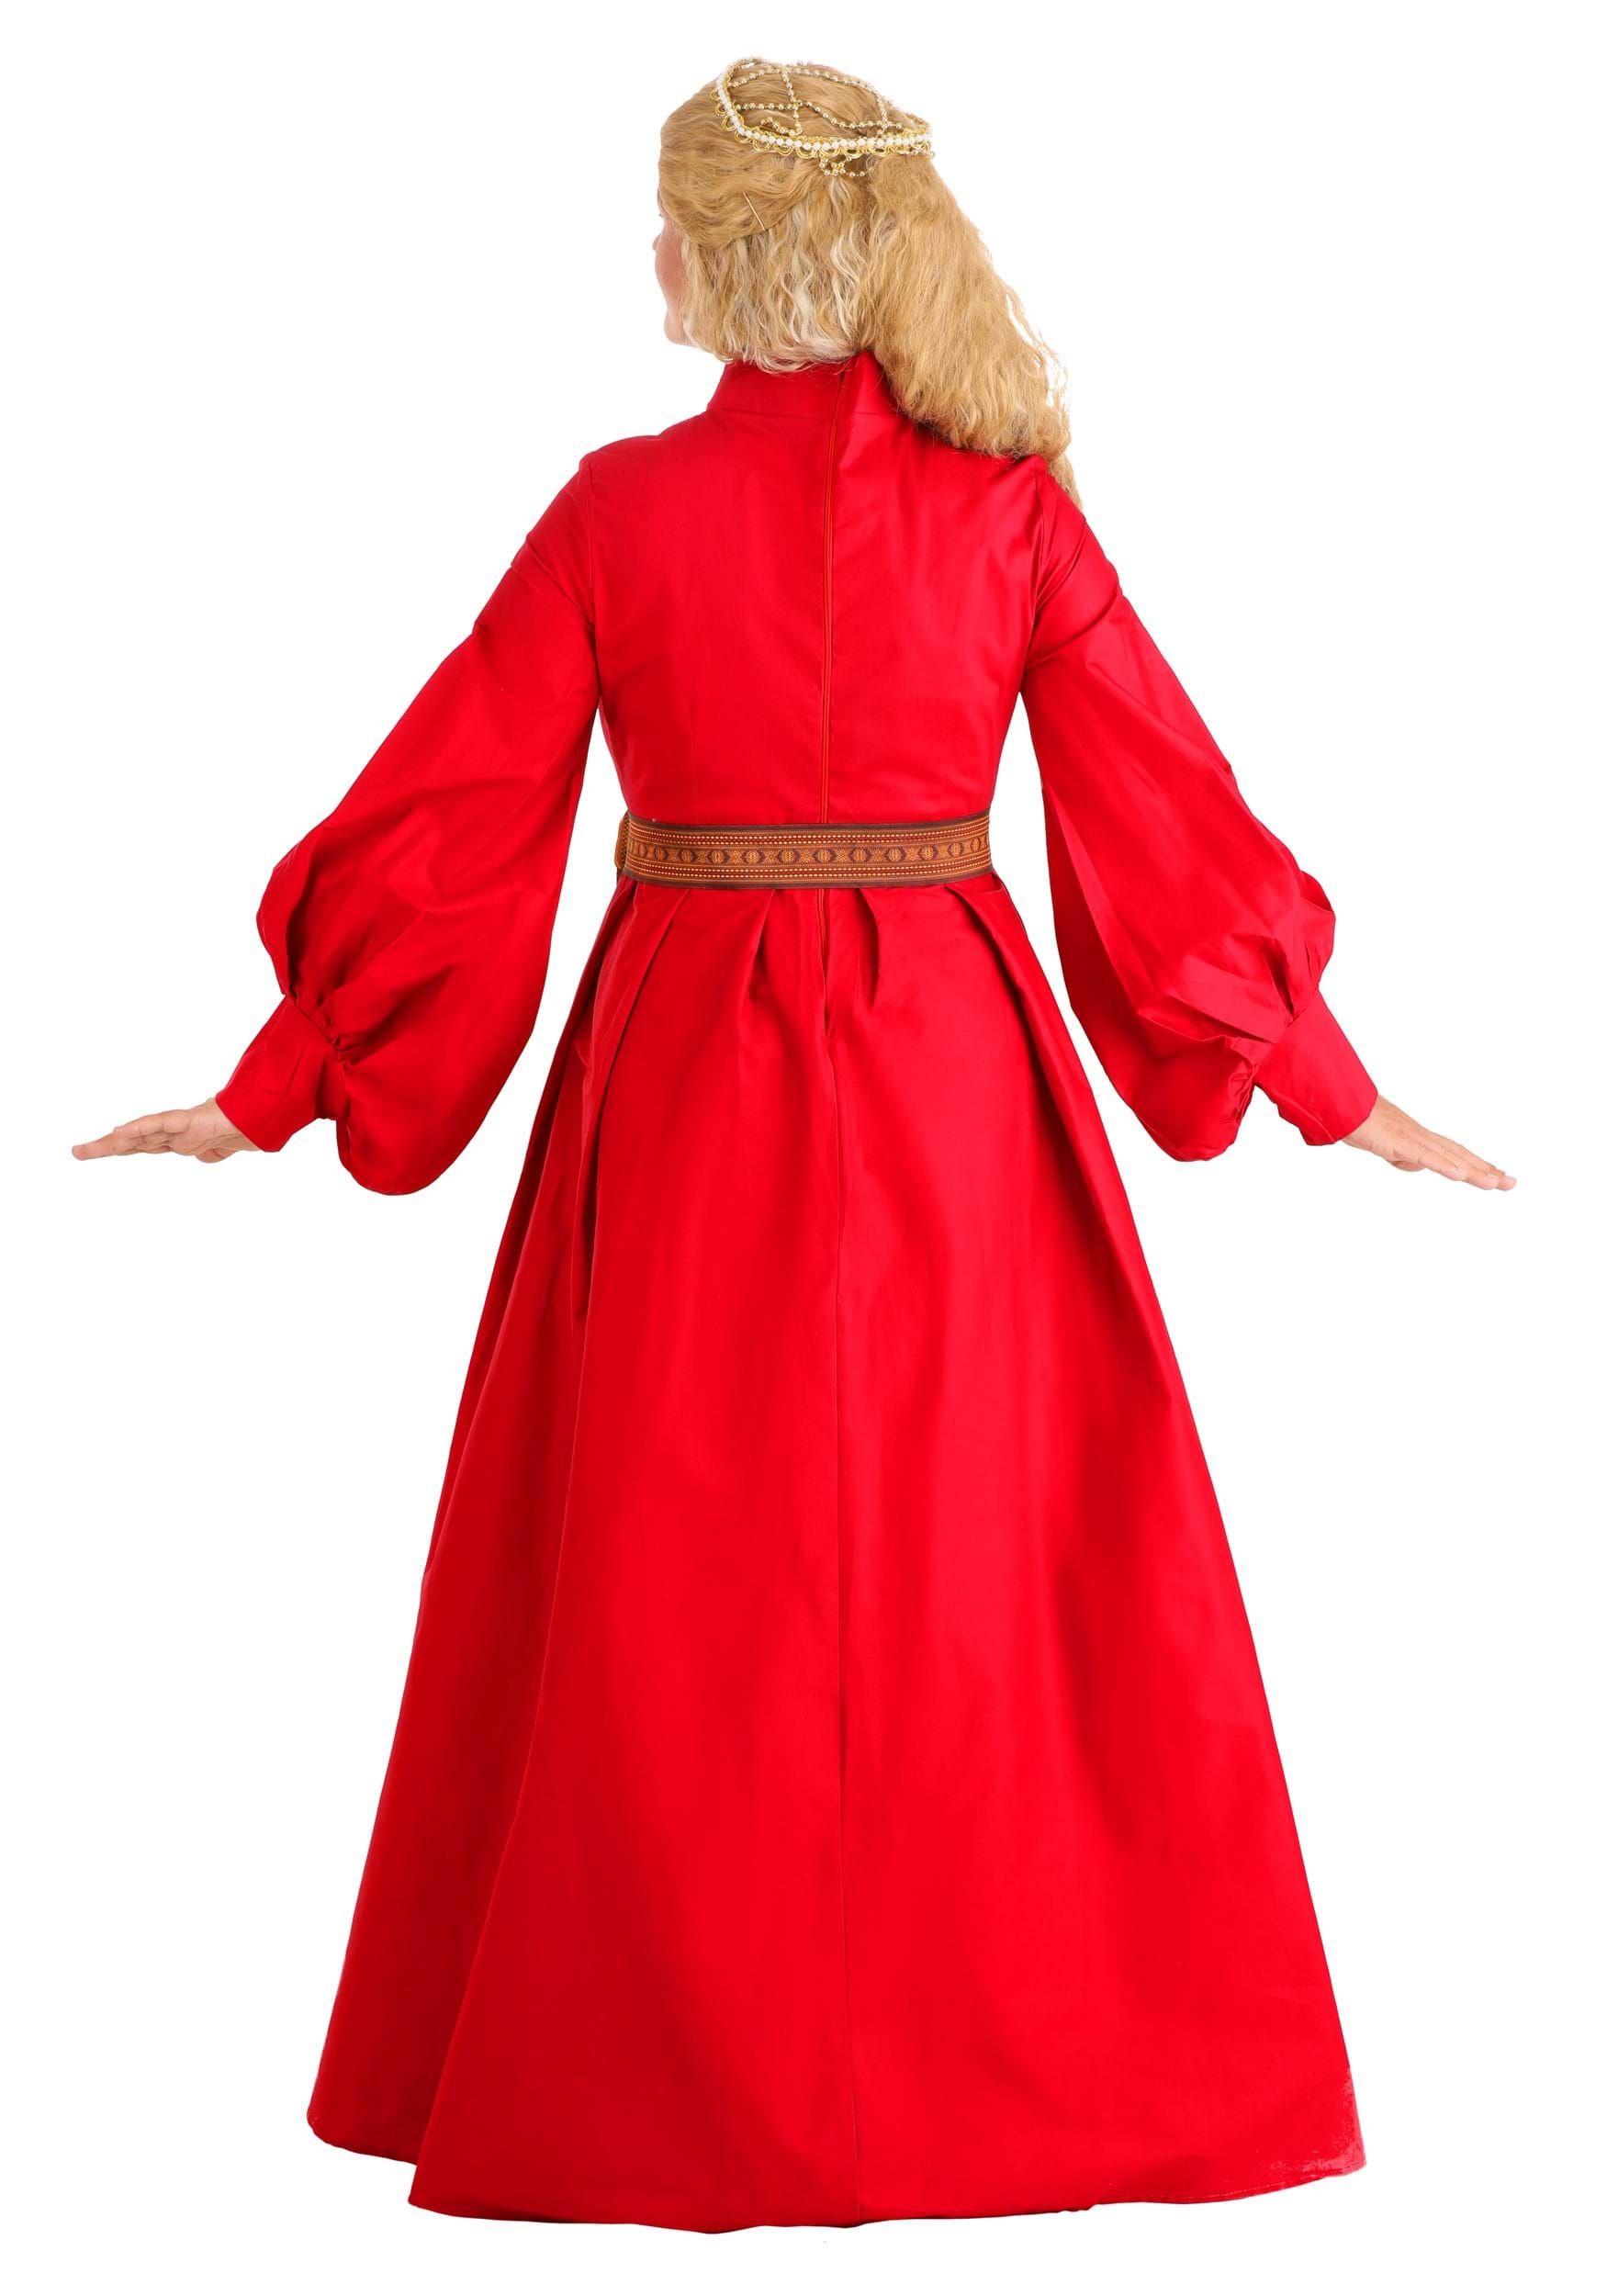 Princess Bride Costume For Women Red Buttercup Dress